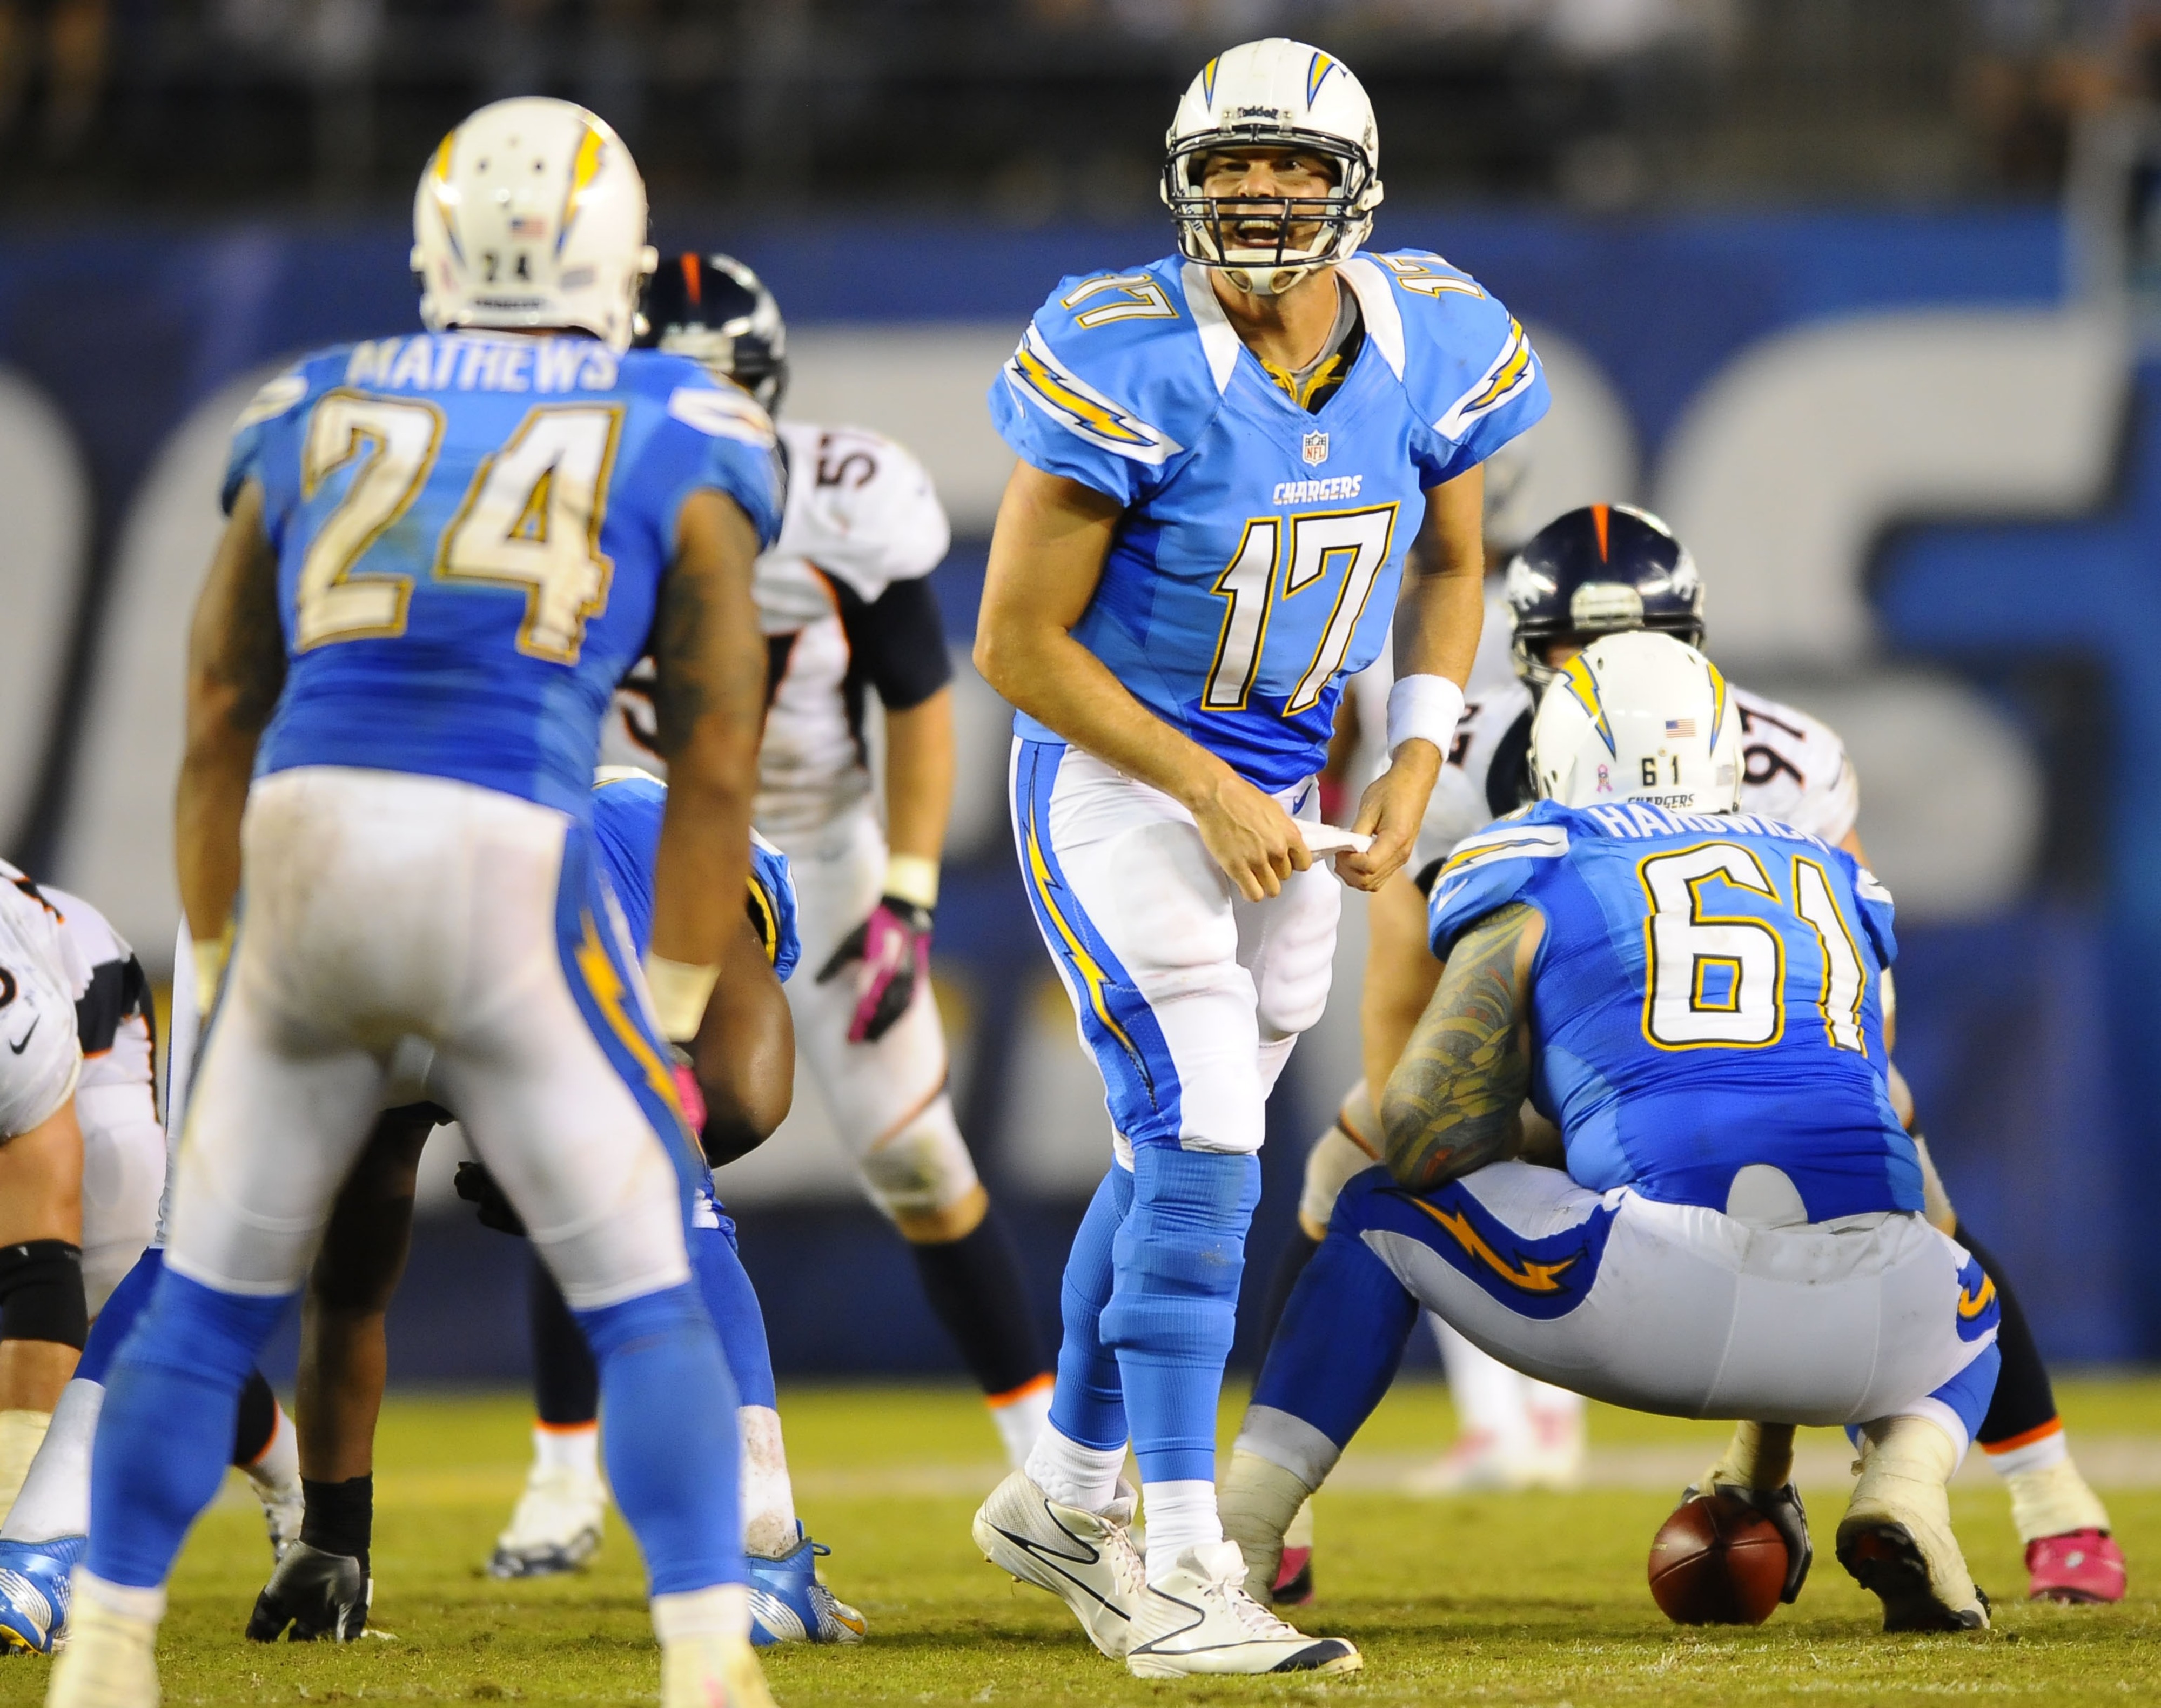 Fortunately for Charger fans, we will be able to watch another #17 in Bruin blue at Qualcomm Stadium.